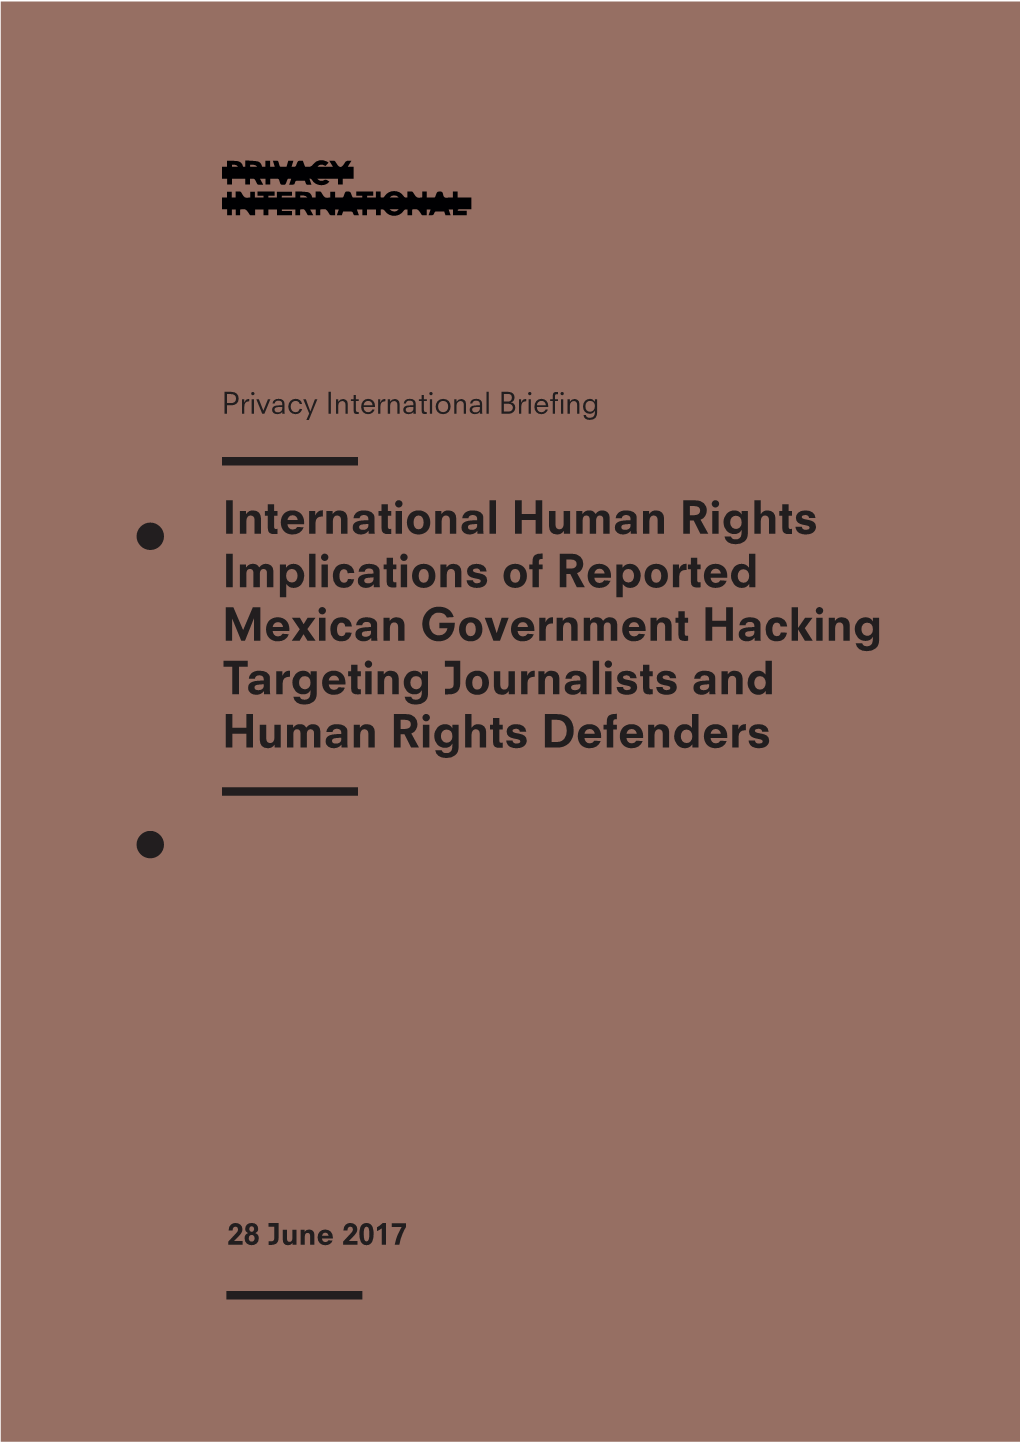 Briefing on the International Human Rights Implications of Reported Mexican Government Hacking Targeting Journalists and Human